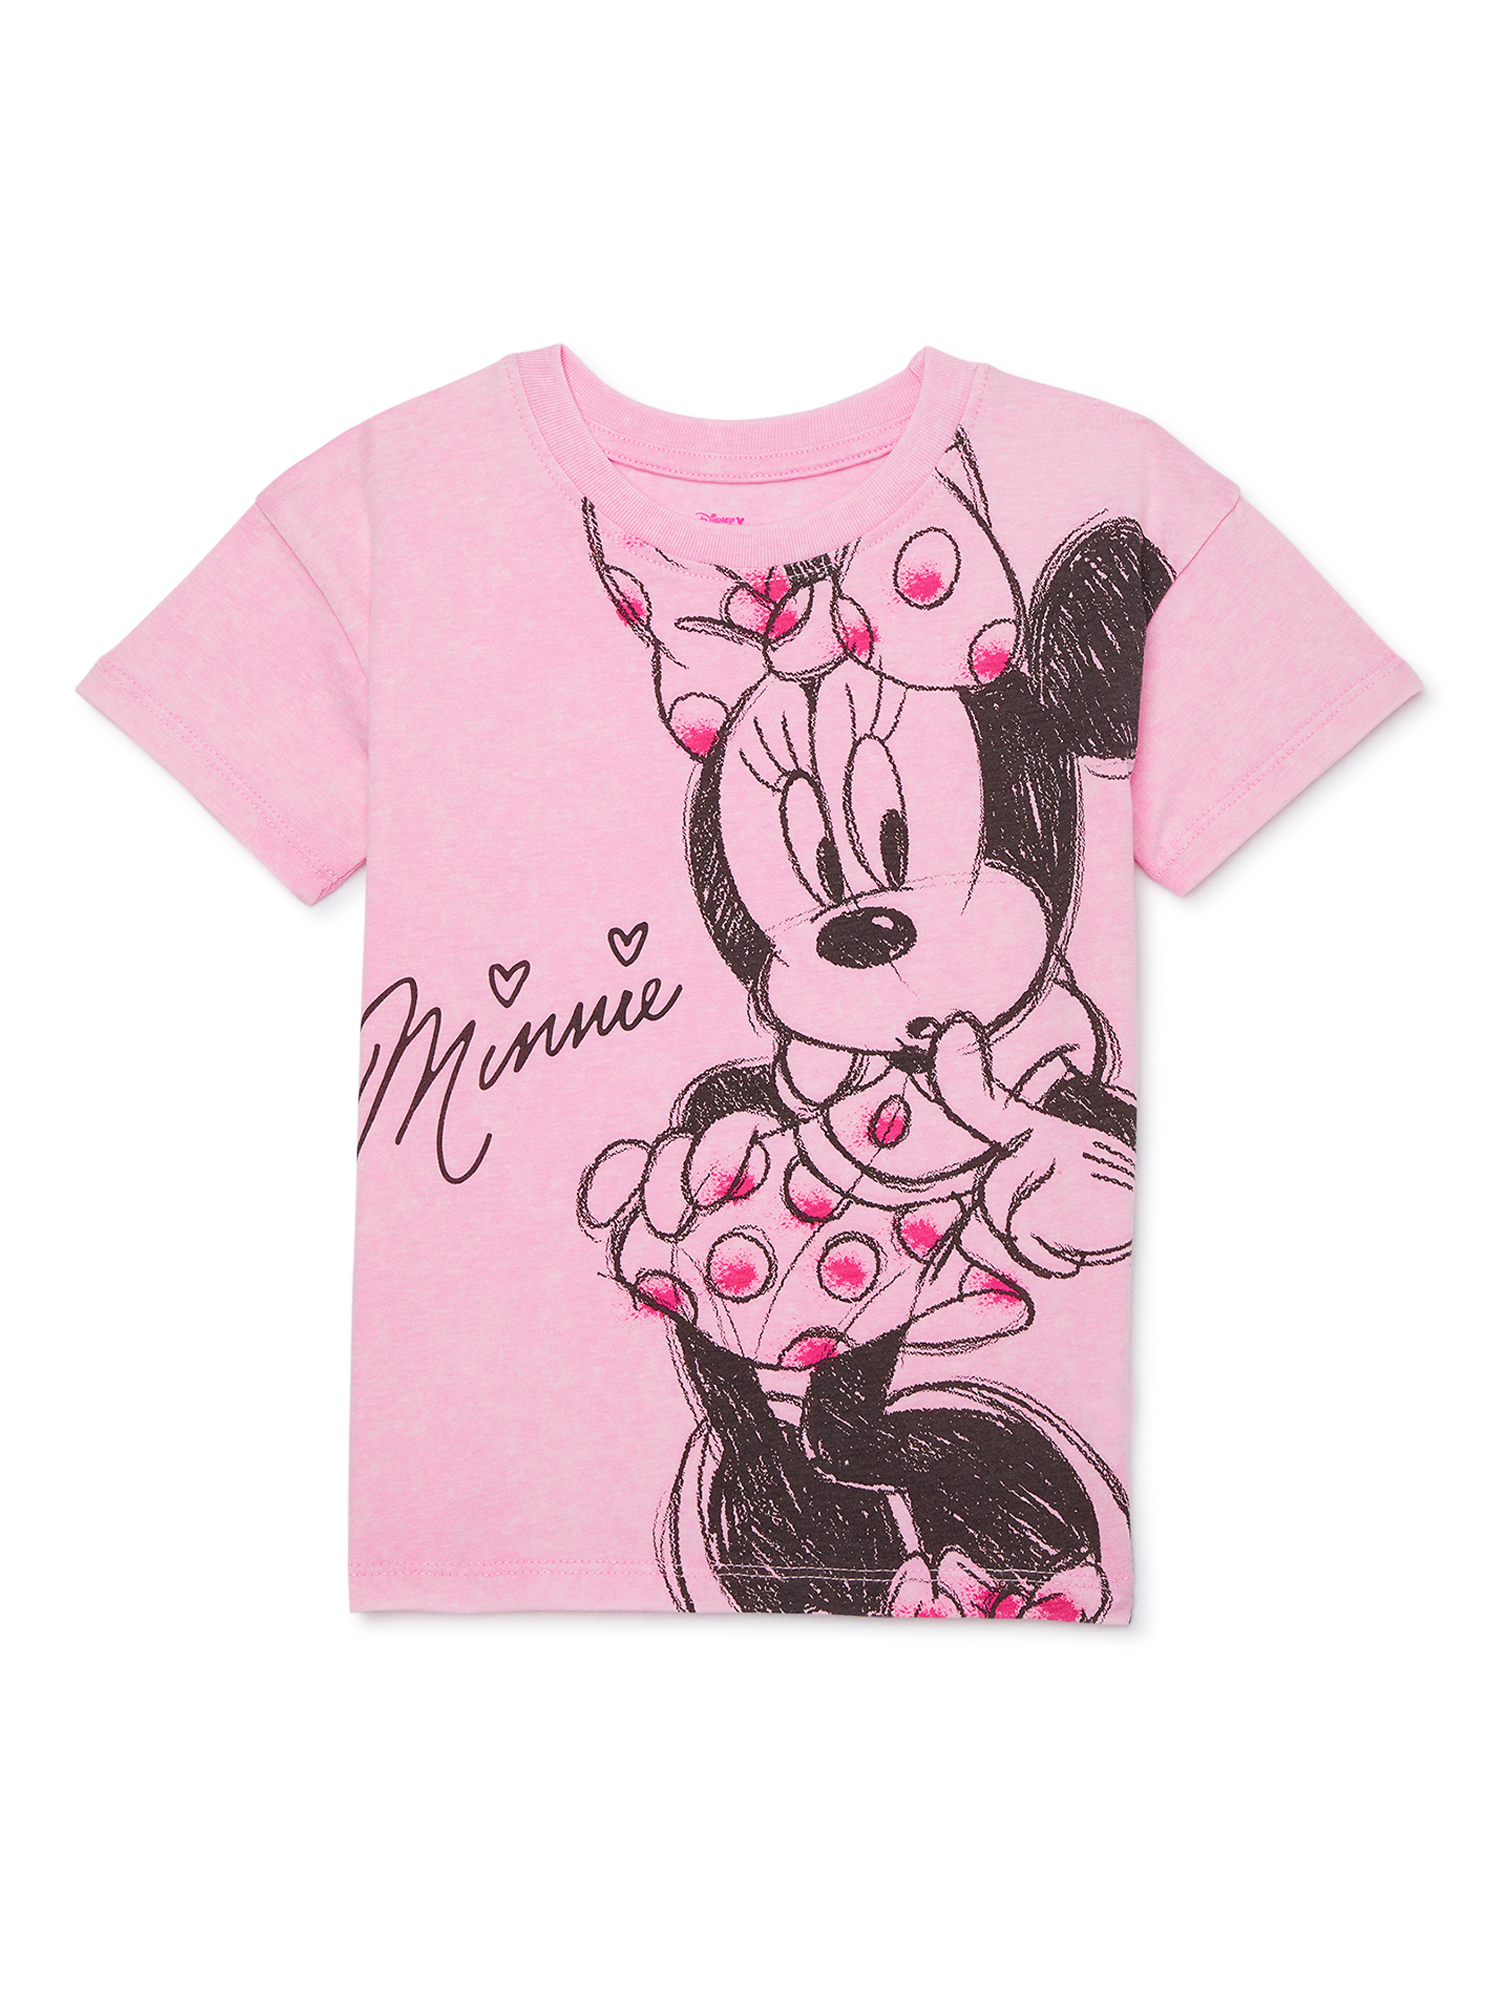 Minnie Mouse Toddler Girls Short Sleeve Crewneck T-Shirt, Sizes 12M-5T - image 5 of 7